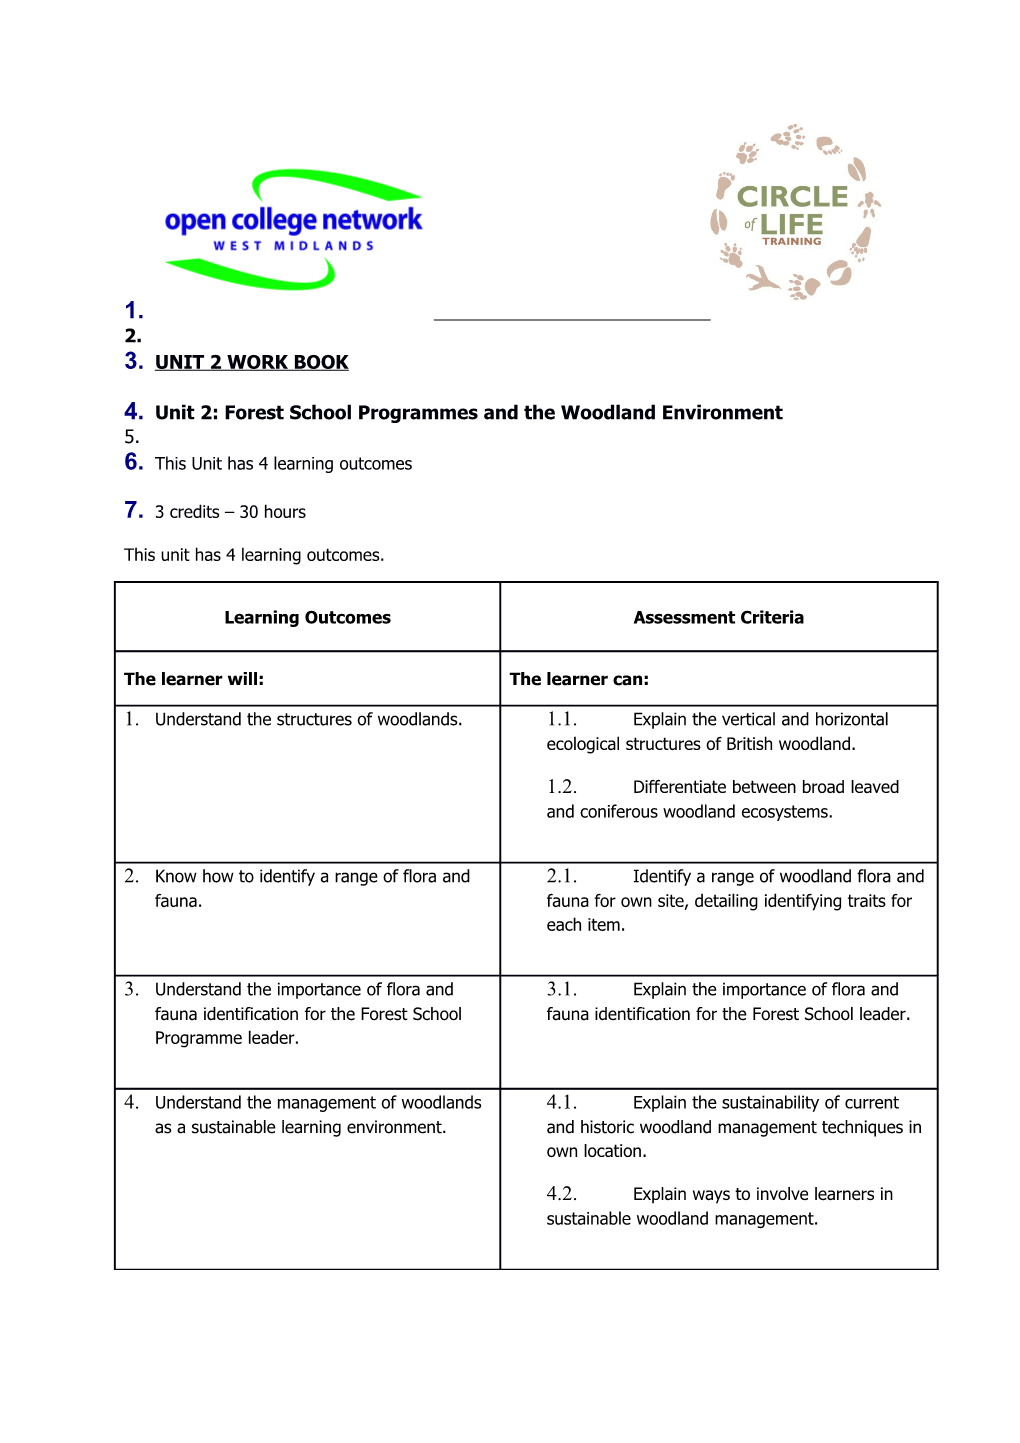 Unit 2: Forest School Programmes and the Woodland Environment